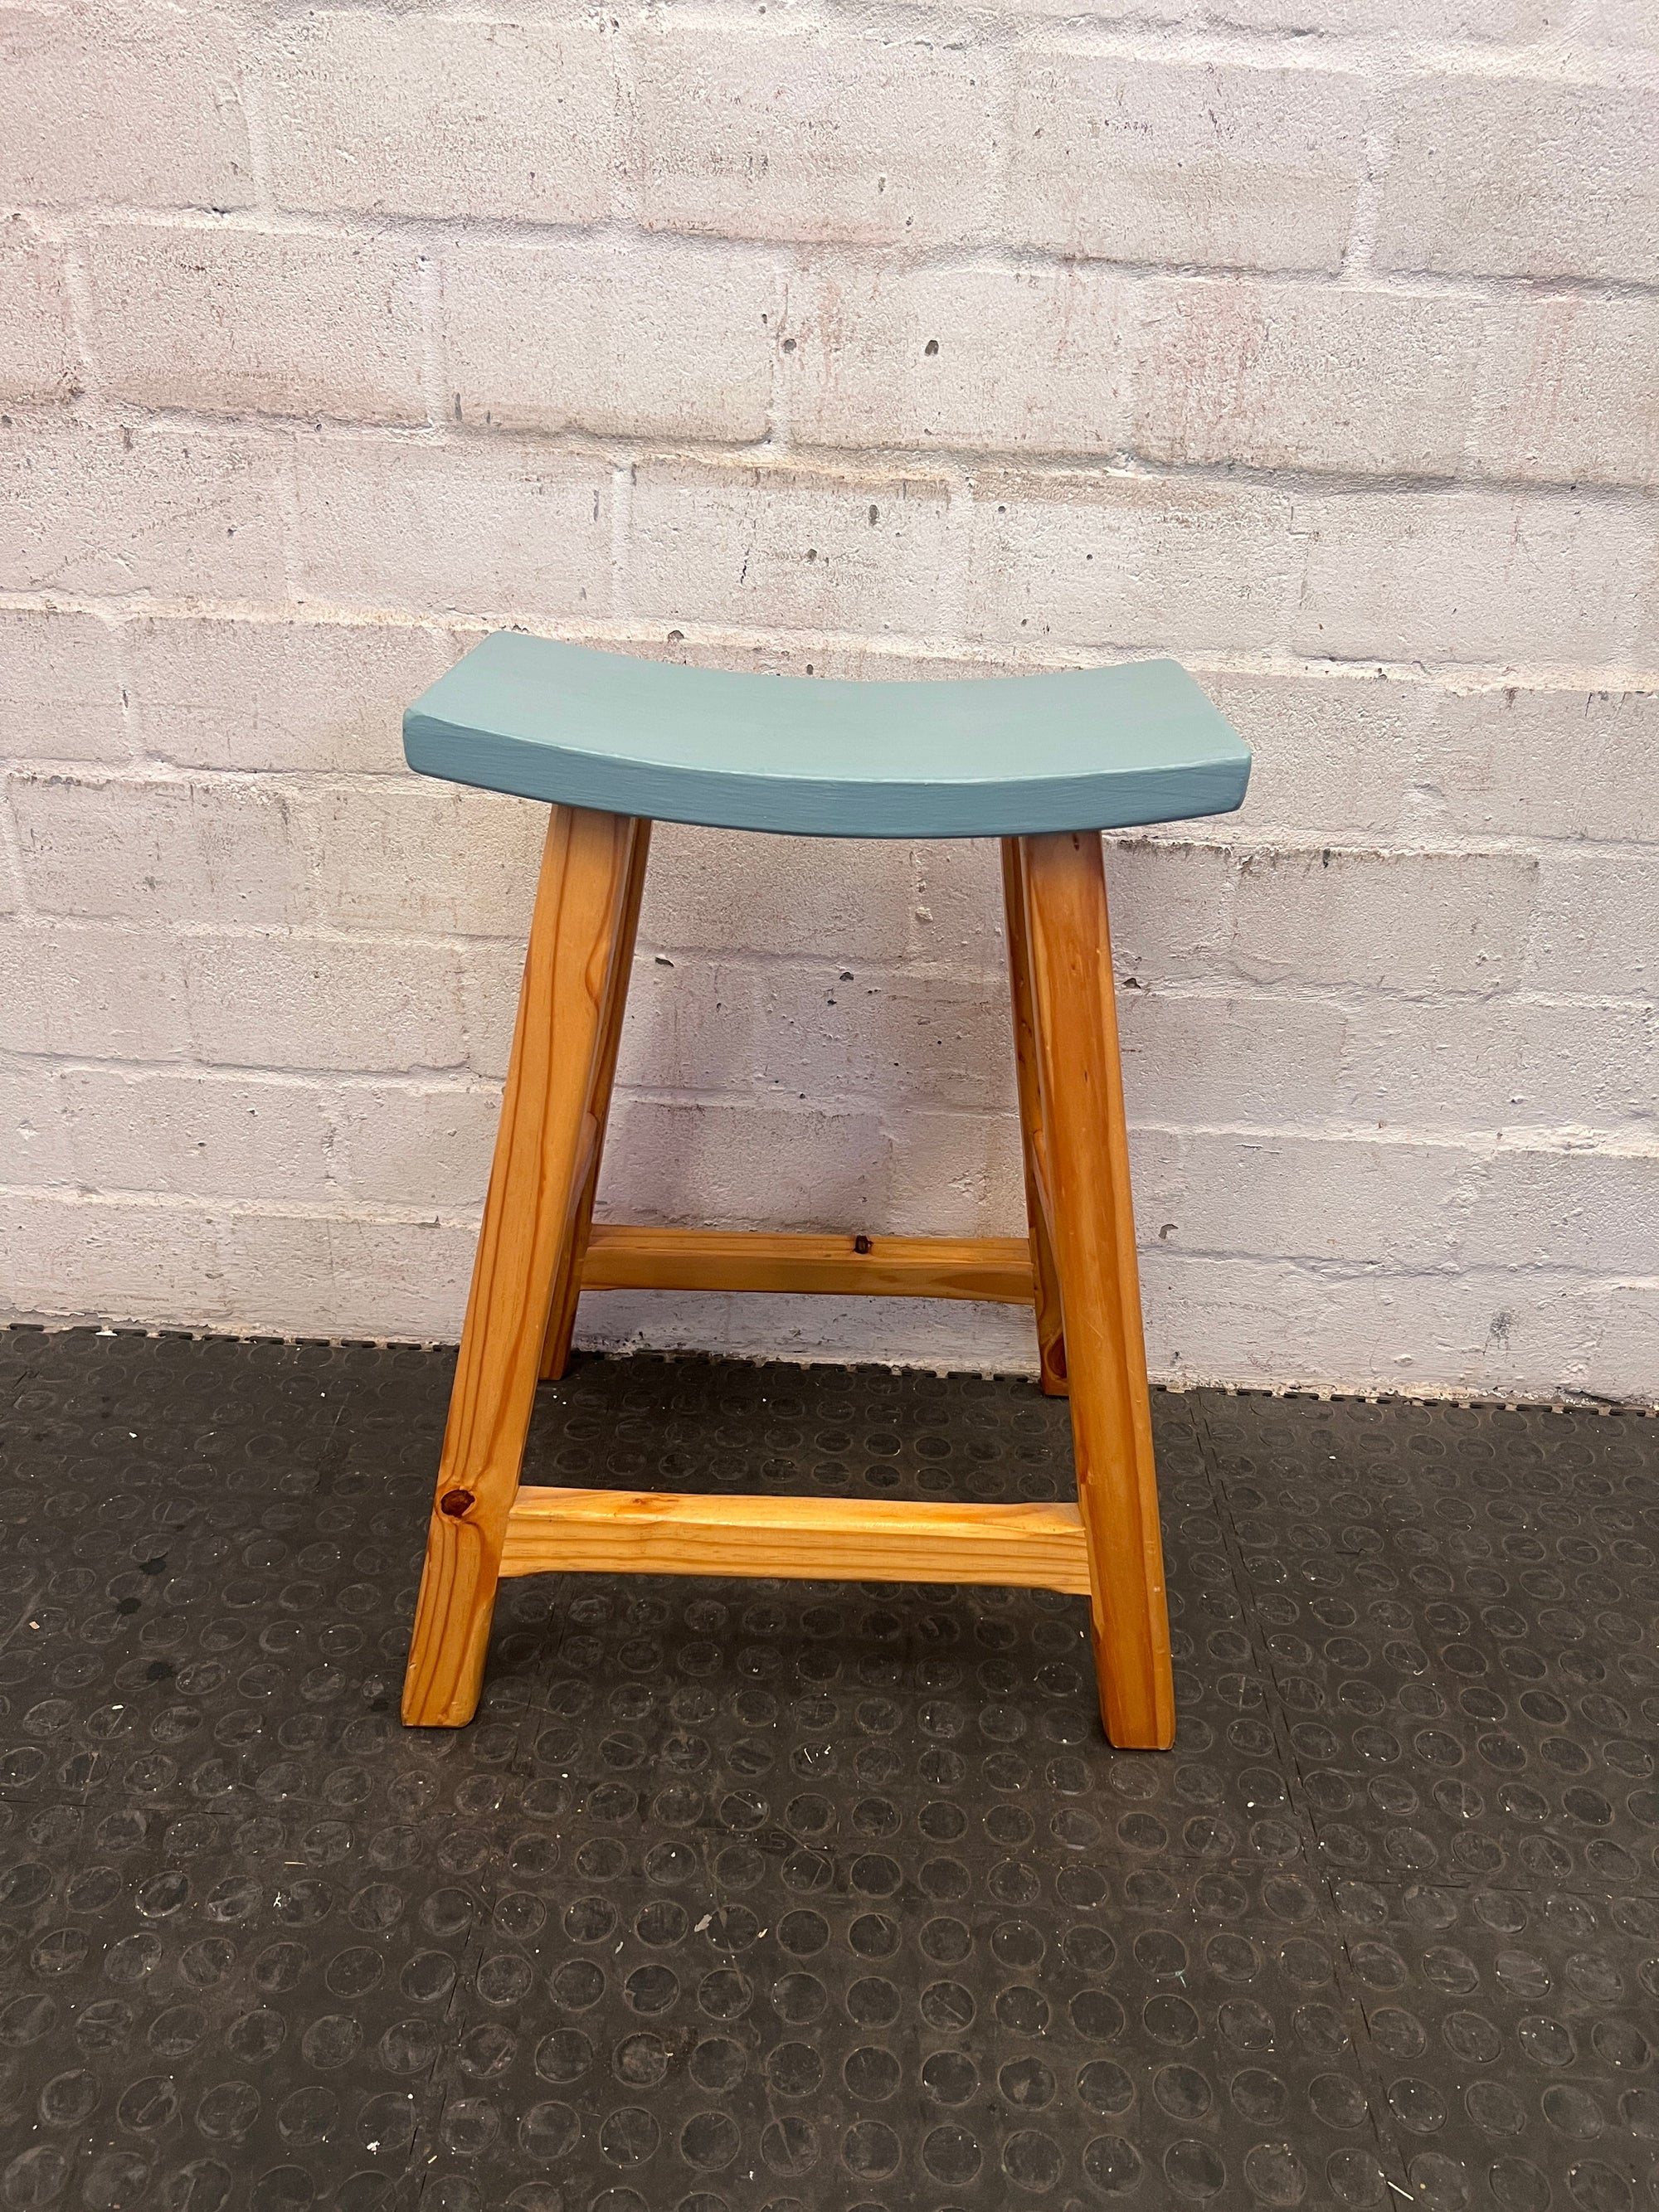 Wooden Stool with Blue Seat